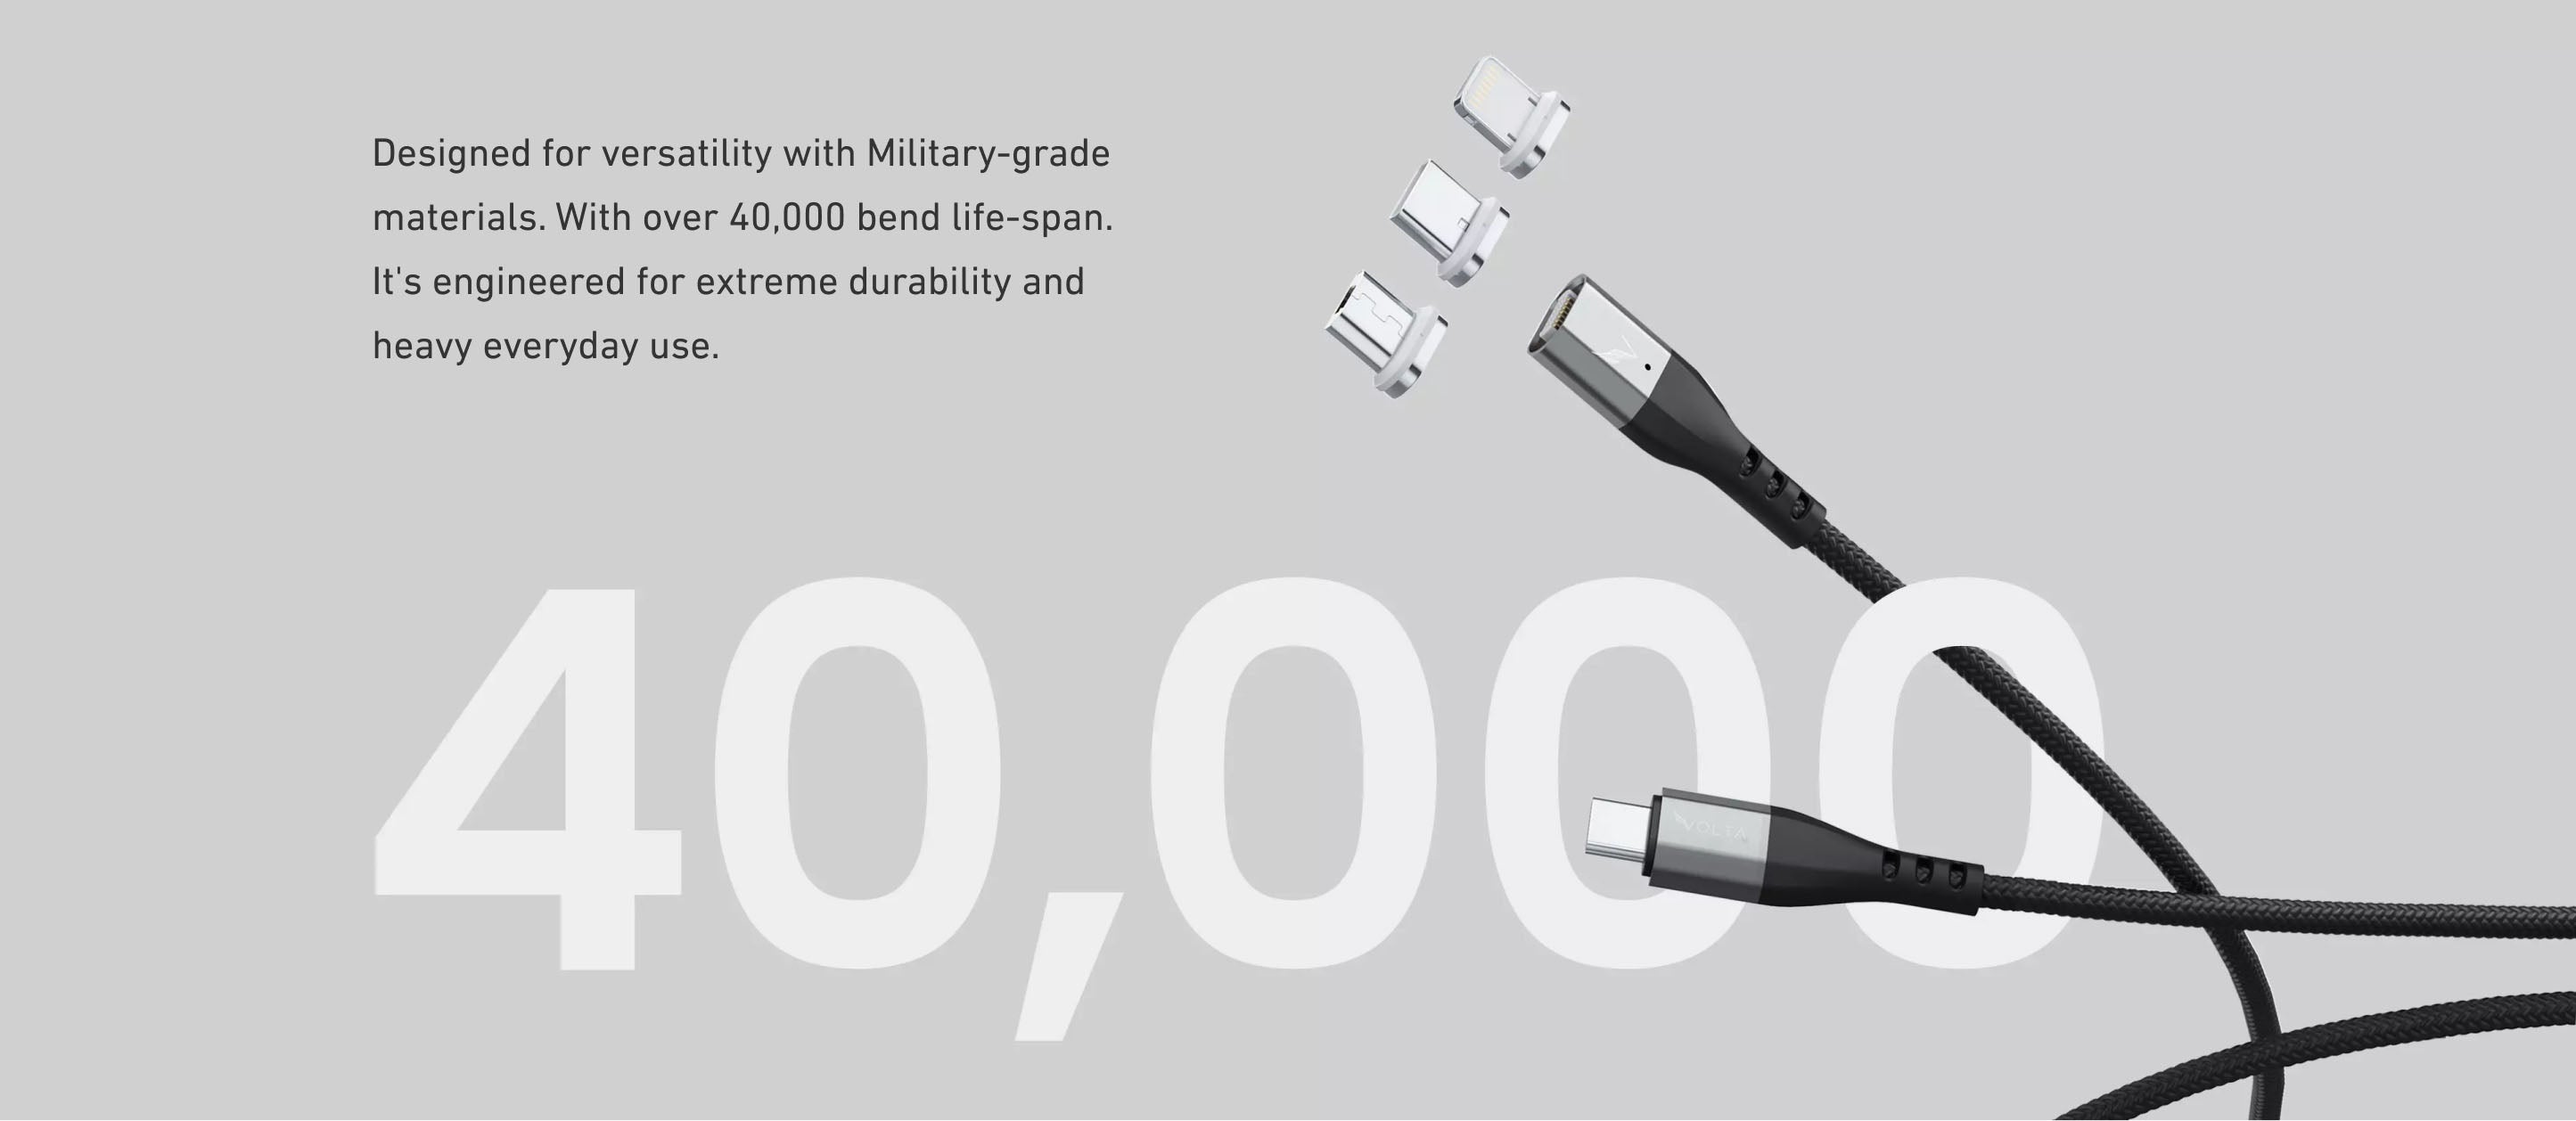 Tough Volta Spark magnetic cable with 40,000 bend life-span